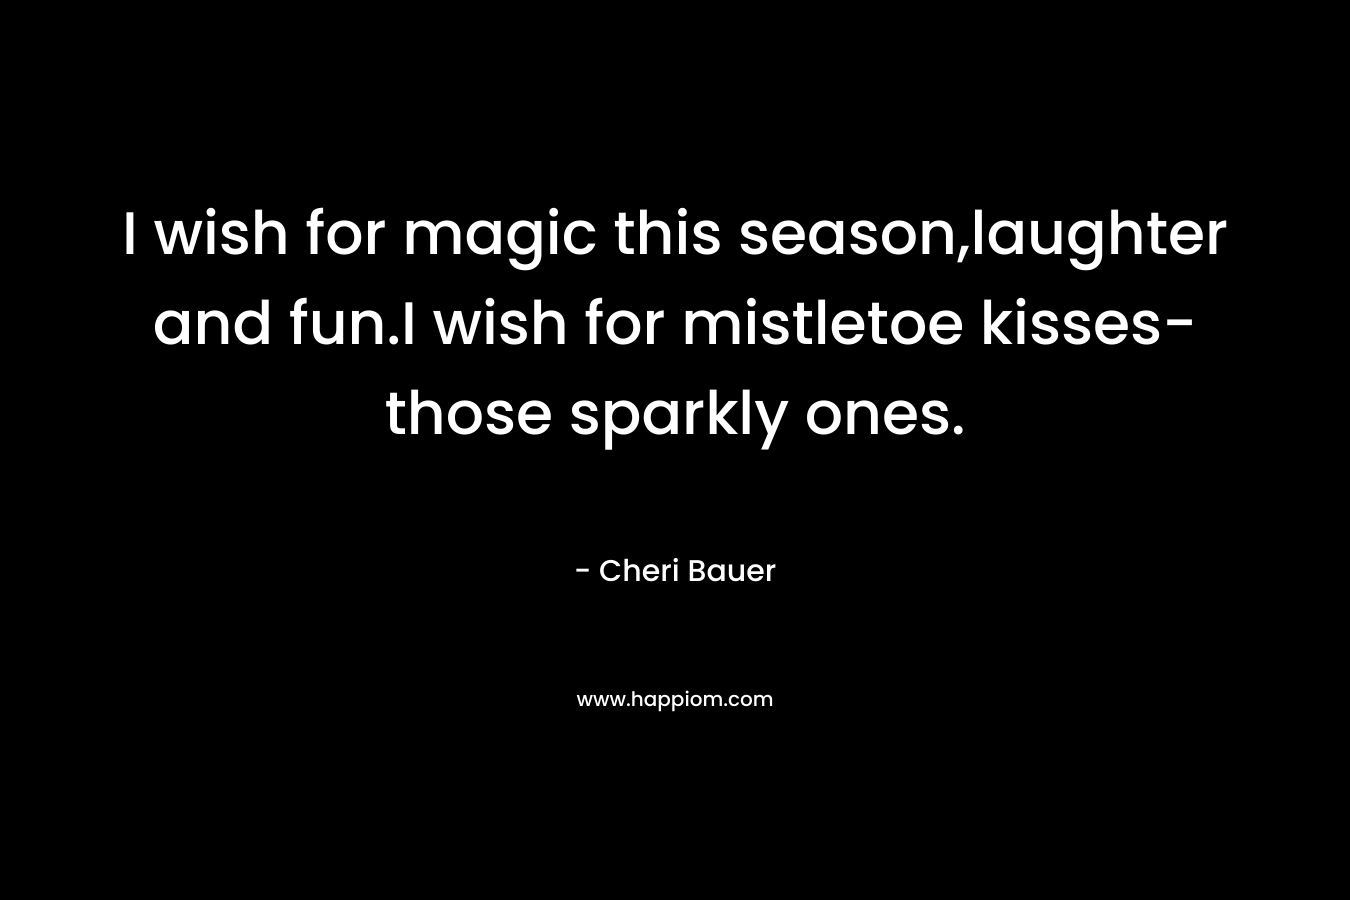 I wish for magic this season,laughter and fun.I wish for mistletoe kisses-those sparkly ones.